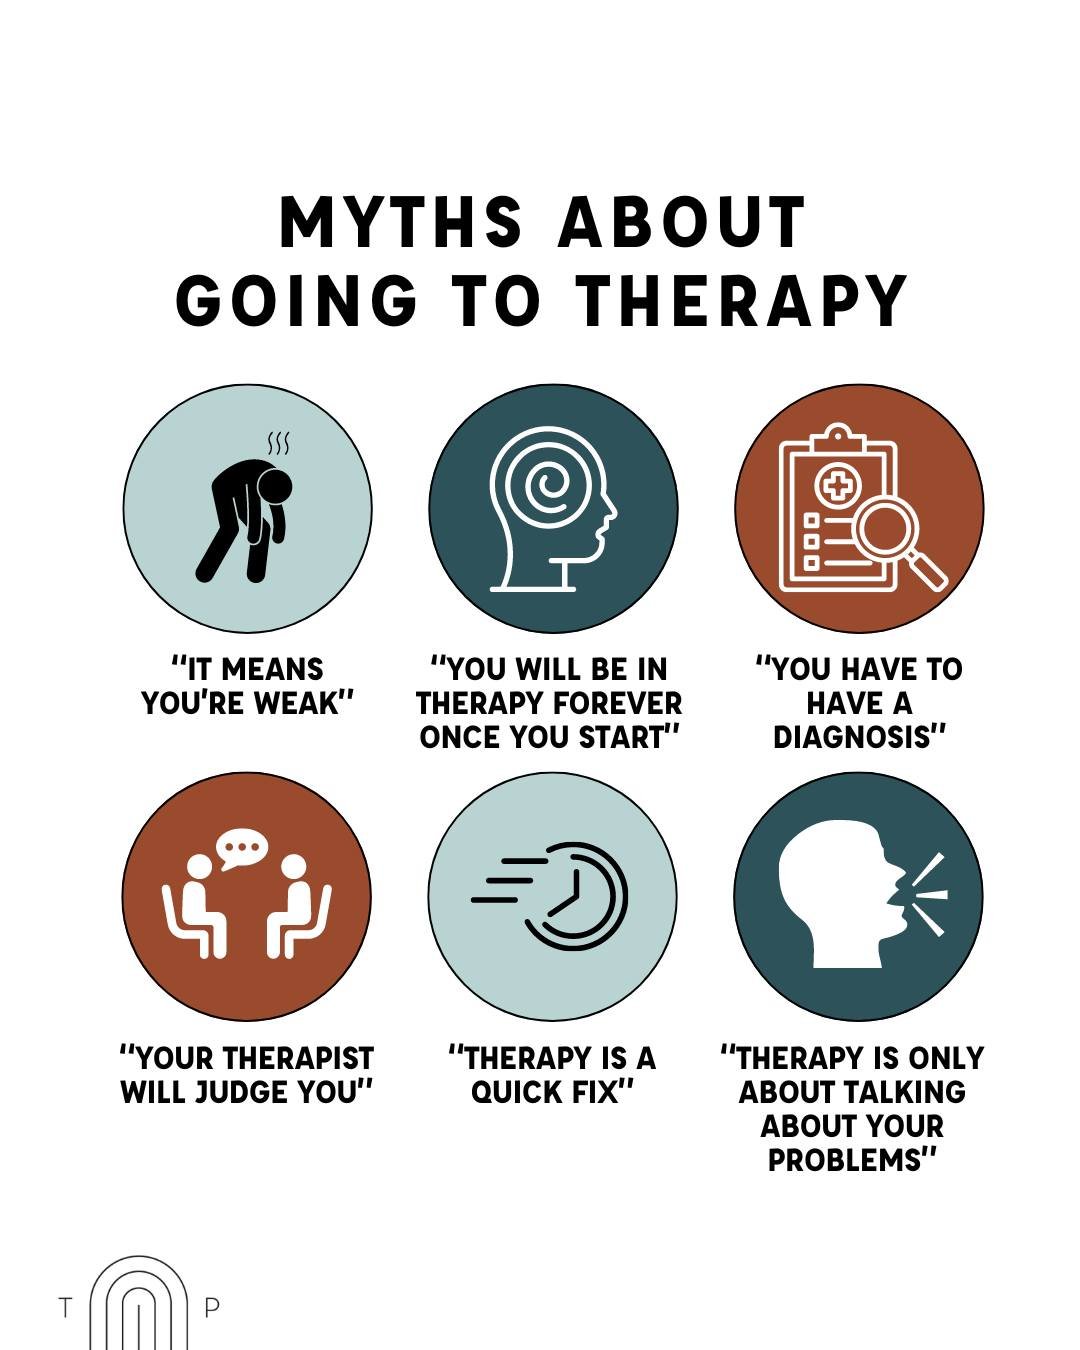 Going to therapy does not make you weak.

Going to therapy does not mean you will be in therapy forever (but if you want to, that's okay too).

Going to therapy does not mean you have to have a mental health diagnosis.

Your therapist will not judge 